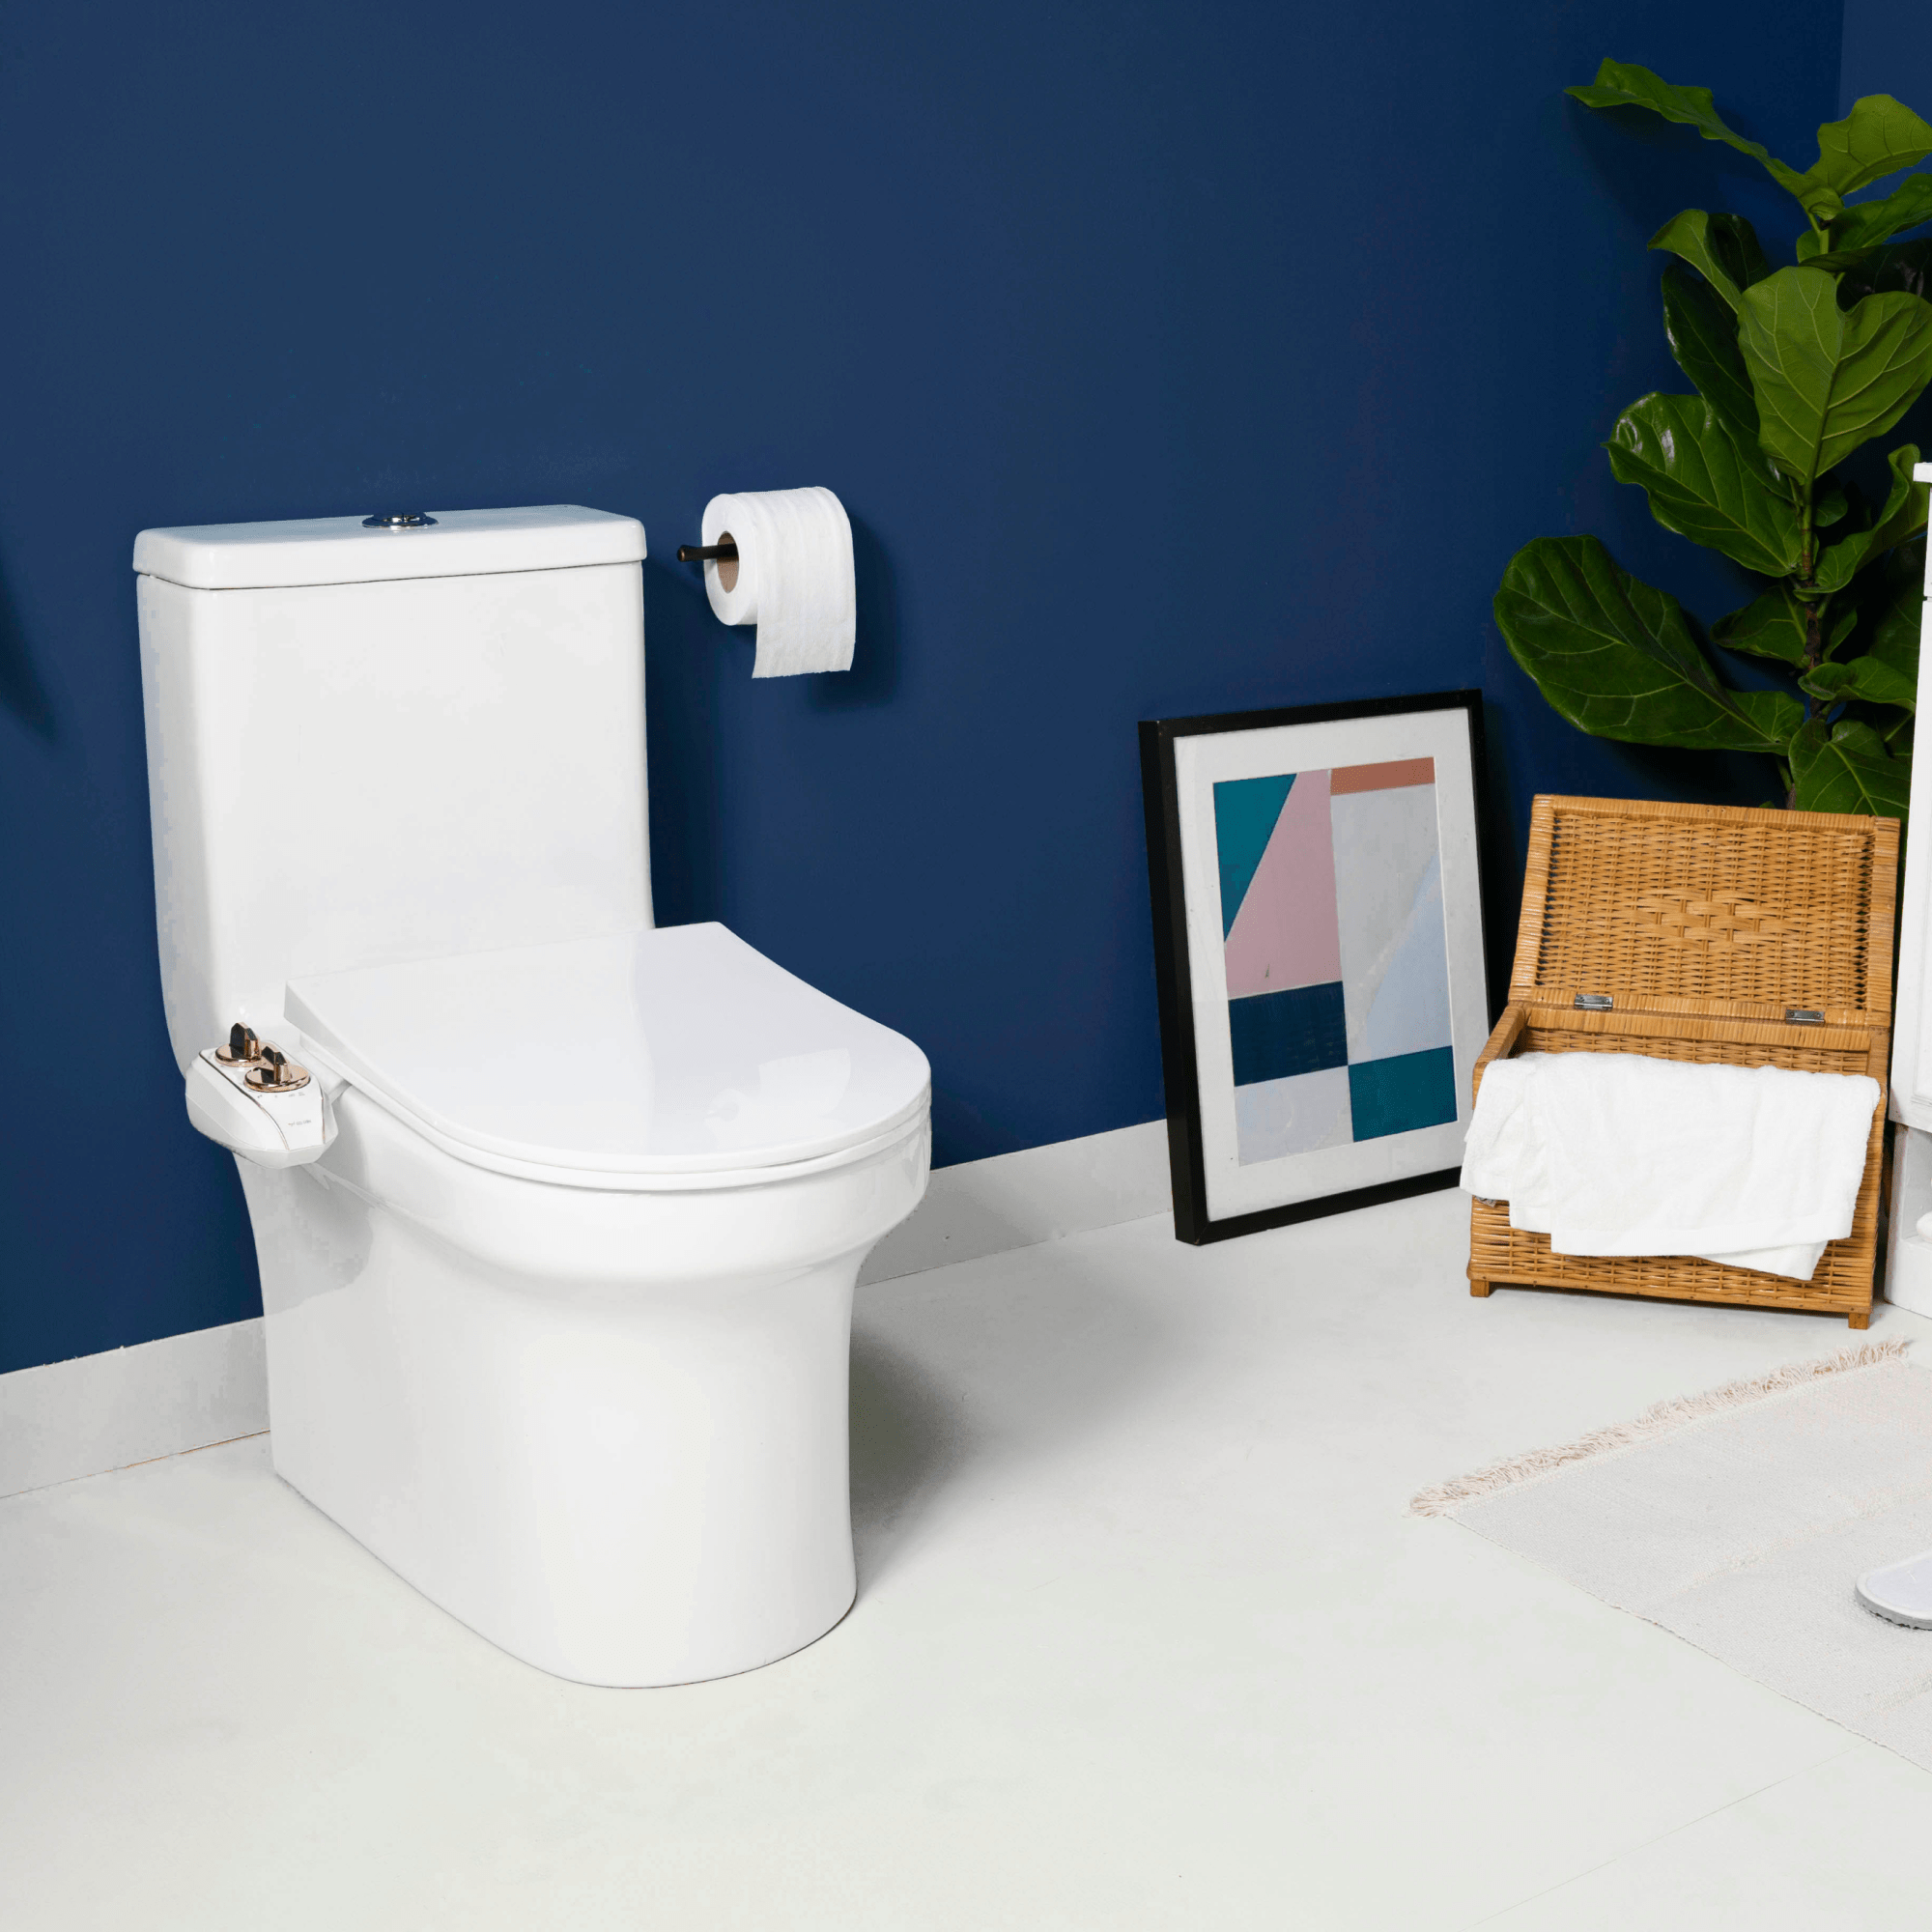 NEO 120 Plus Rose Gold installed on a toilet, in a modern blue bathroom with a plant, painting, and basket of towels